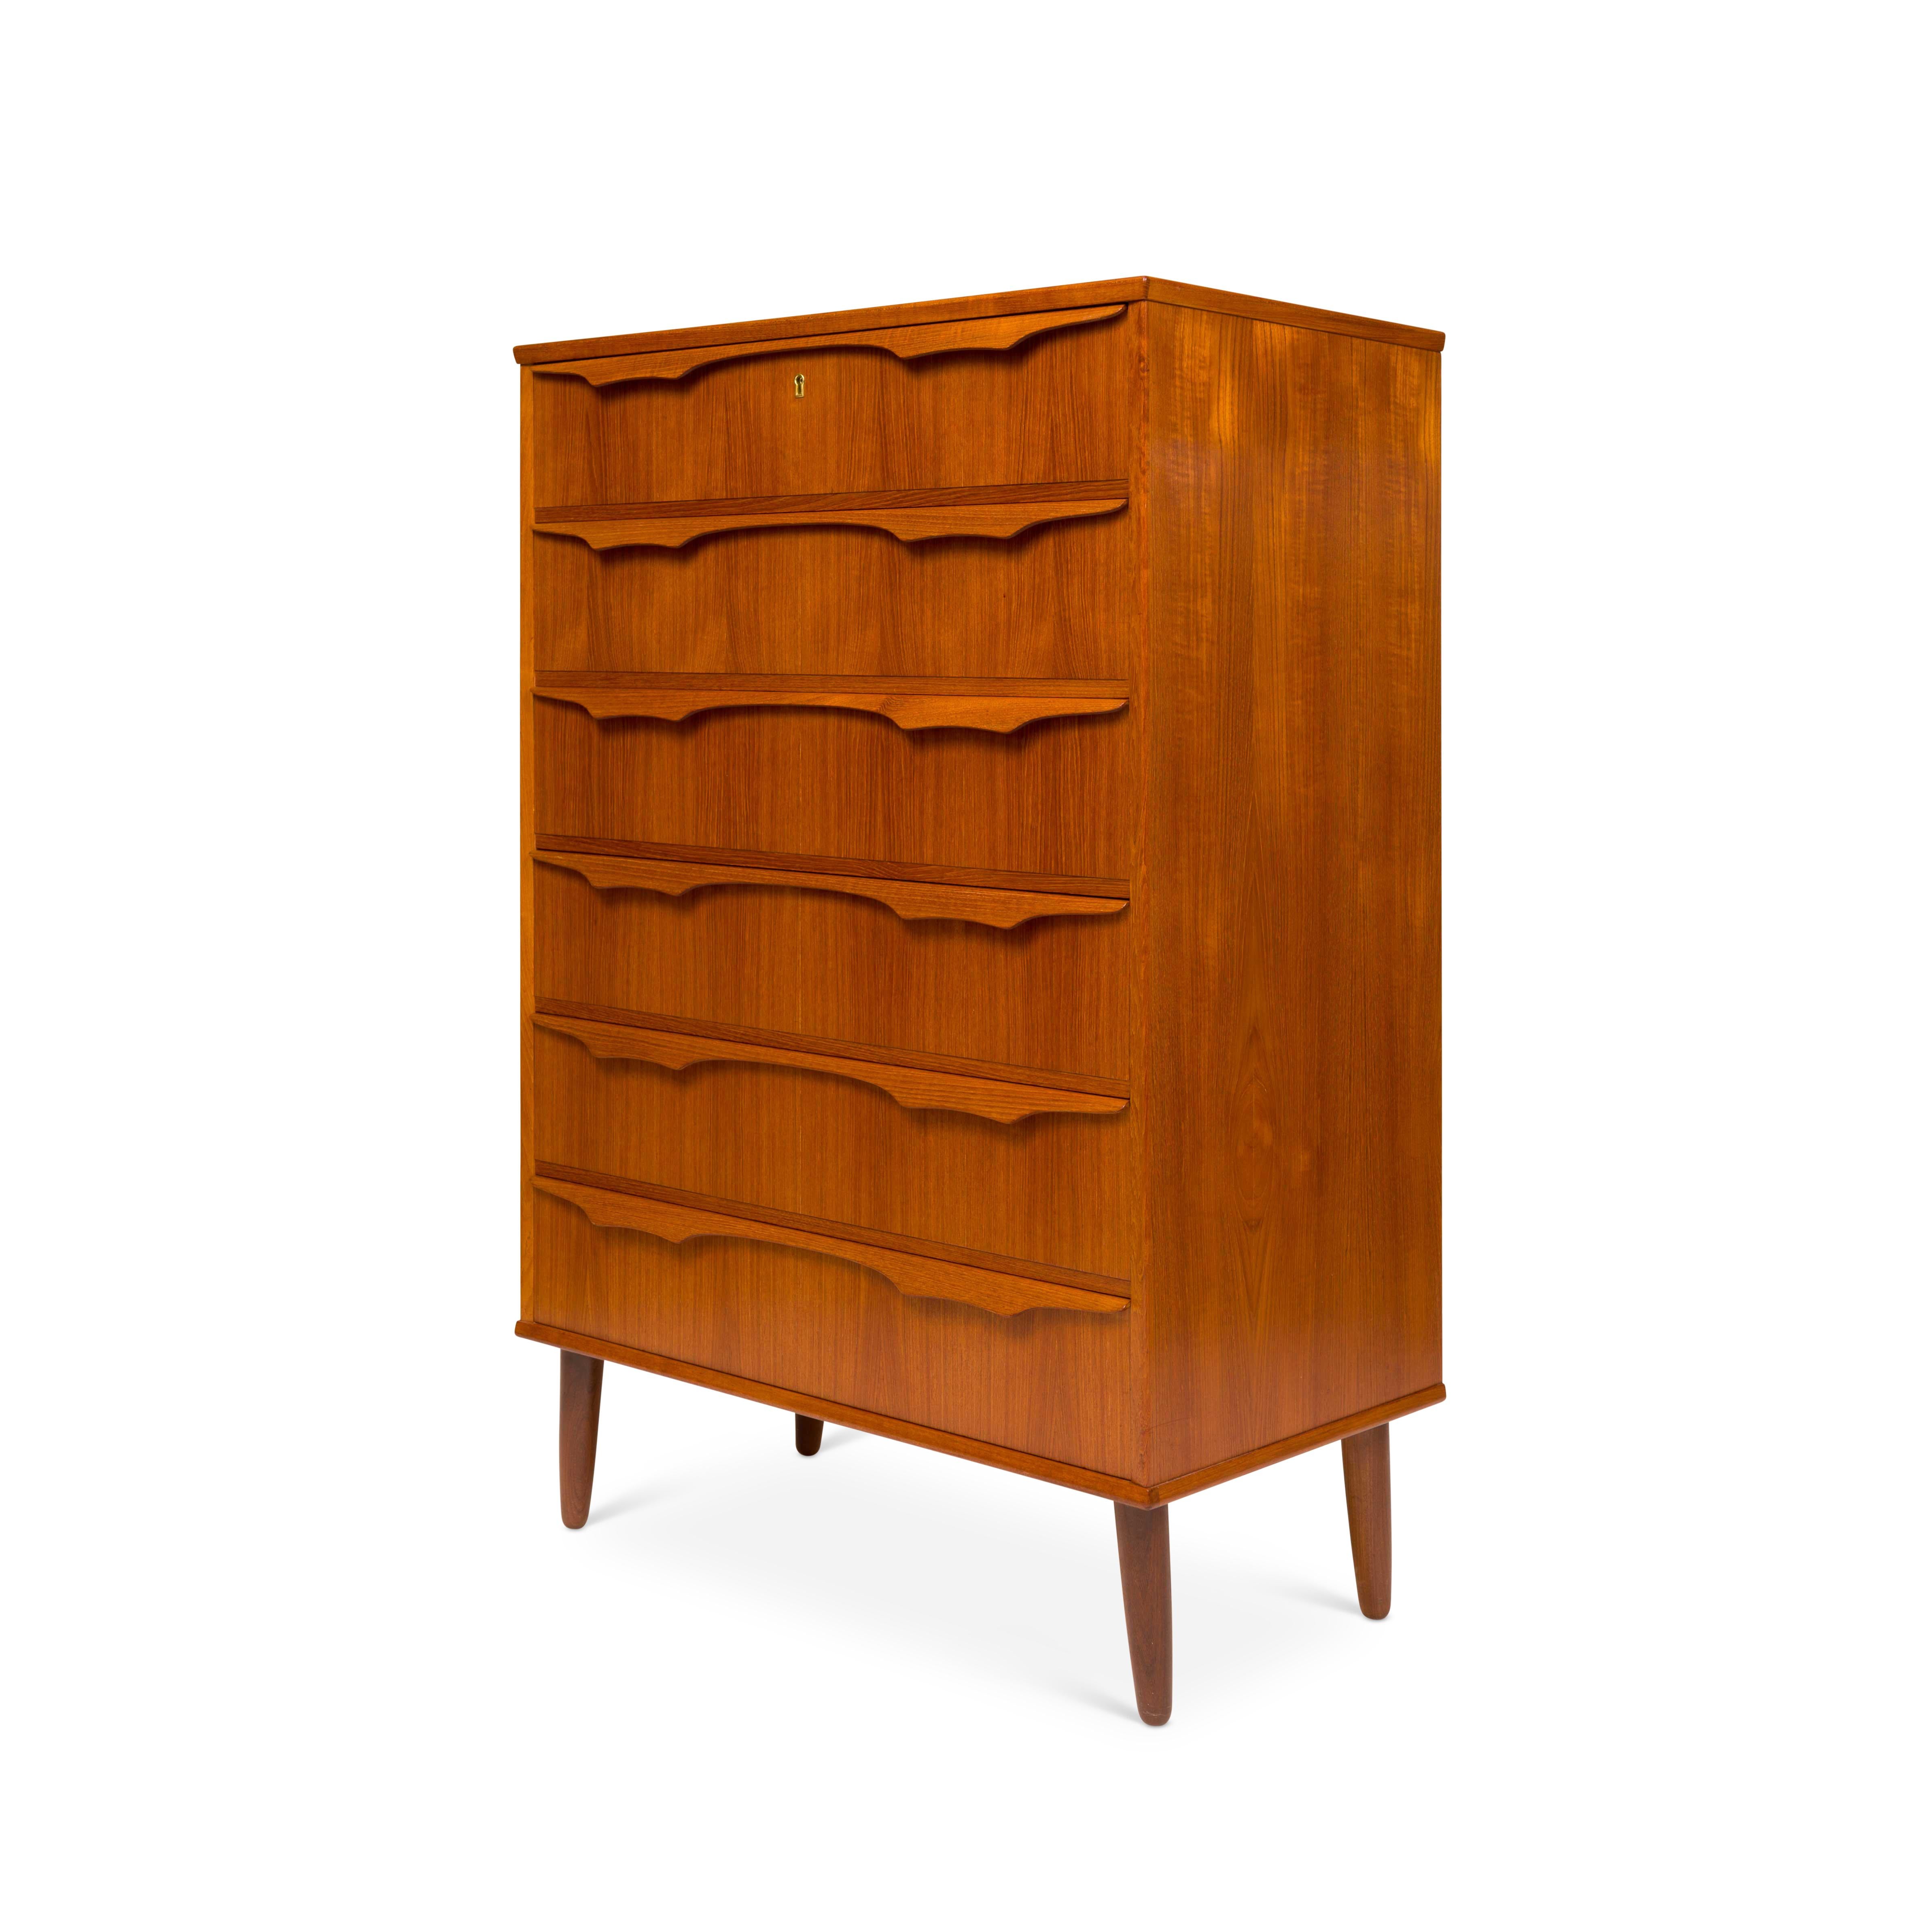 This Danish tallboy chest of drawers embodies the essence of Mid-Century design. Its six drawers, adorned with sculptured wooden handles and seamless dovetail joins, effortlessly combine functionality with elegance. The natural teak grain adorns its